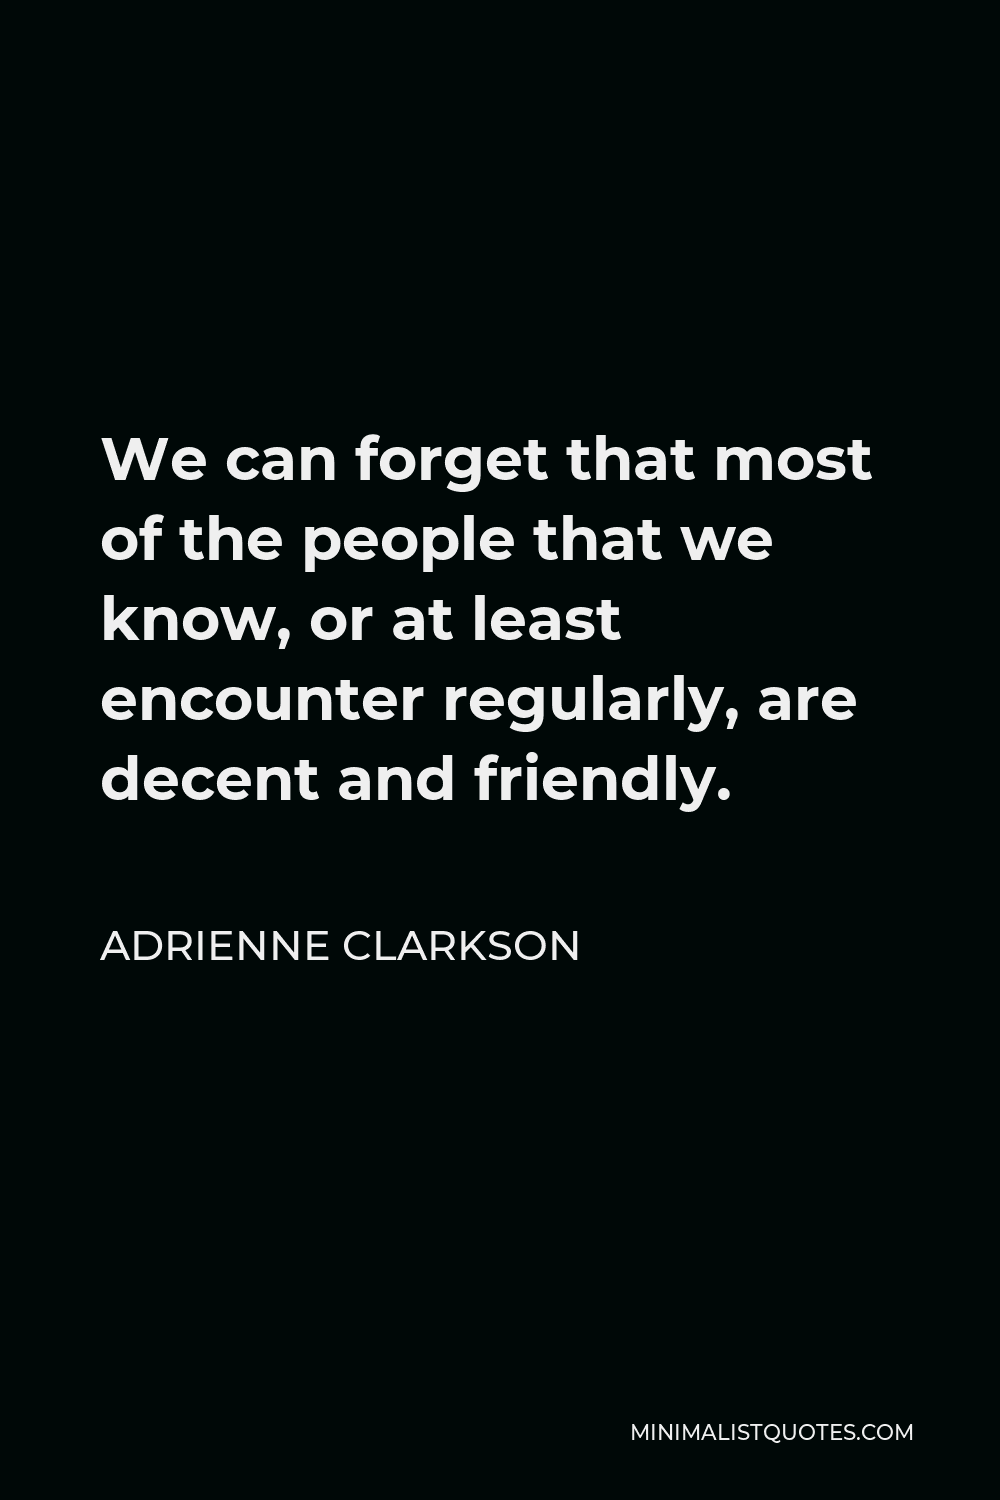 Adrienne Clarkson Quote - We can forget that most of the people that we know, or at least encounter regularly, are decent and friendly.